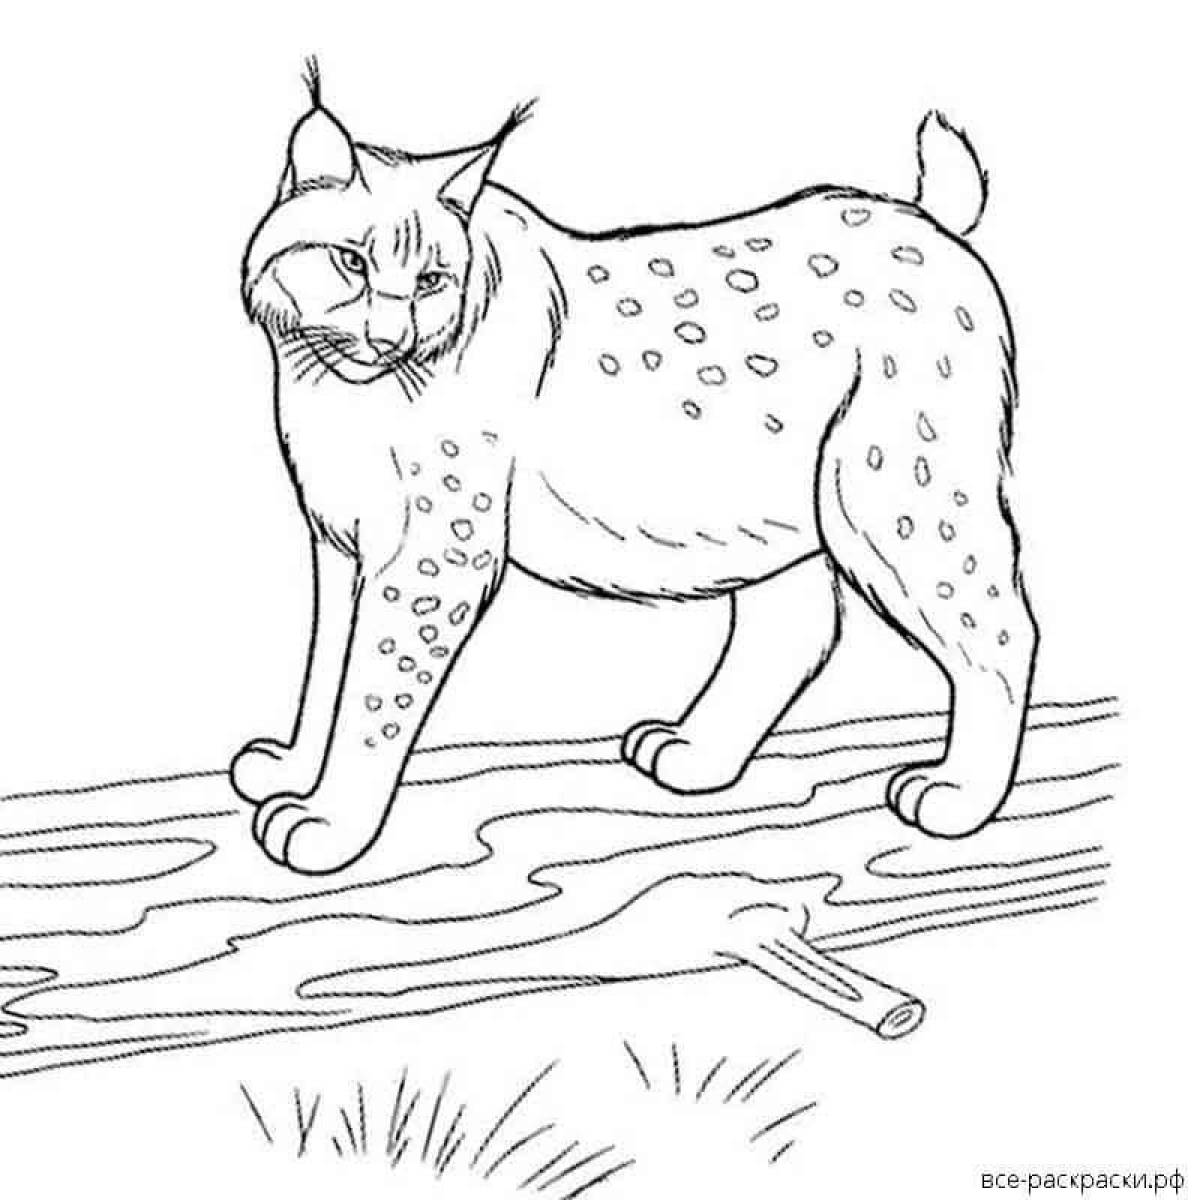 A wonderful lynx coloring book for kids